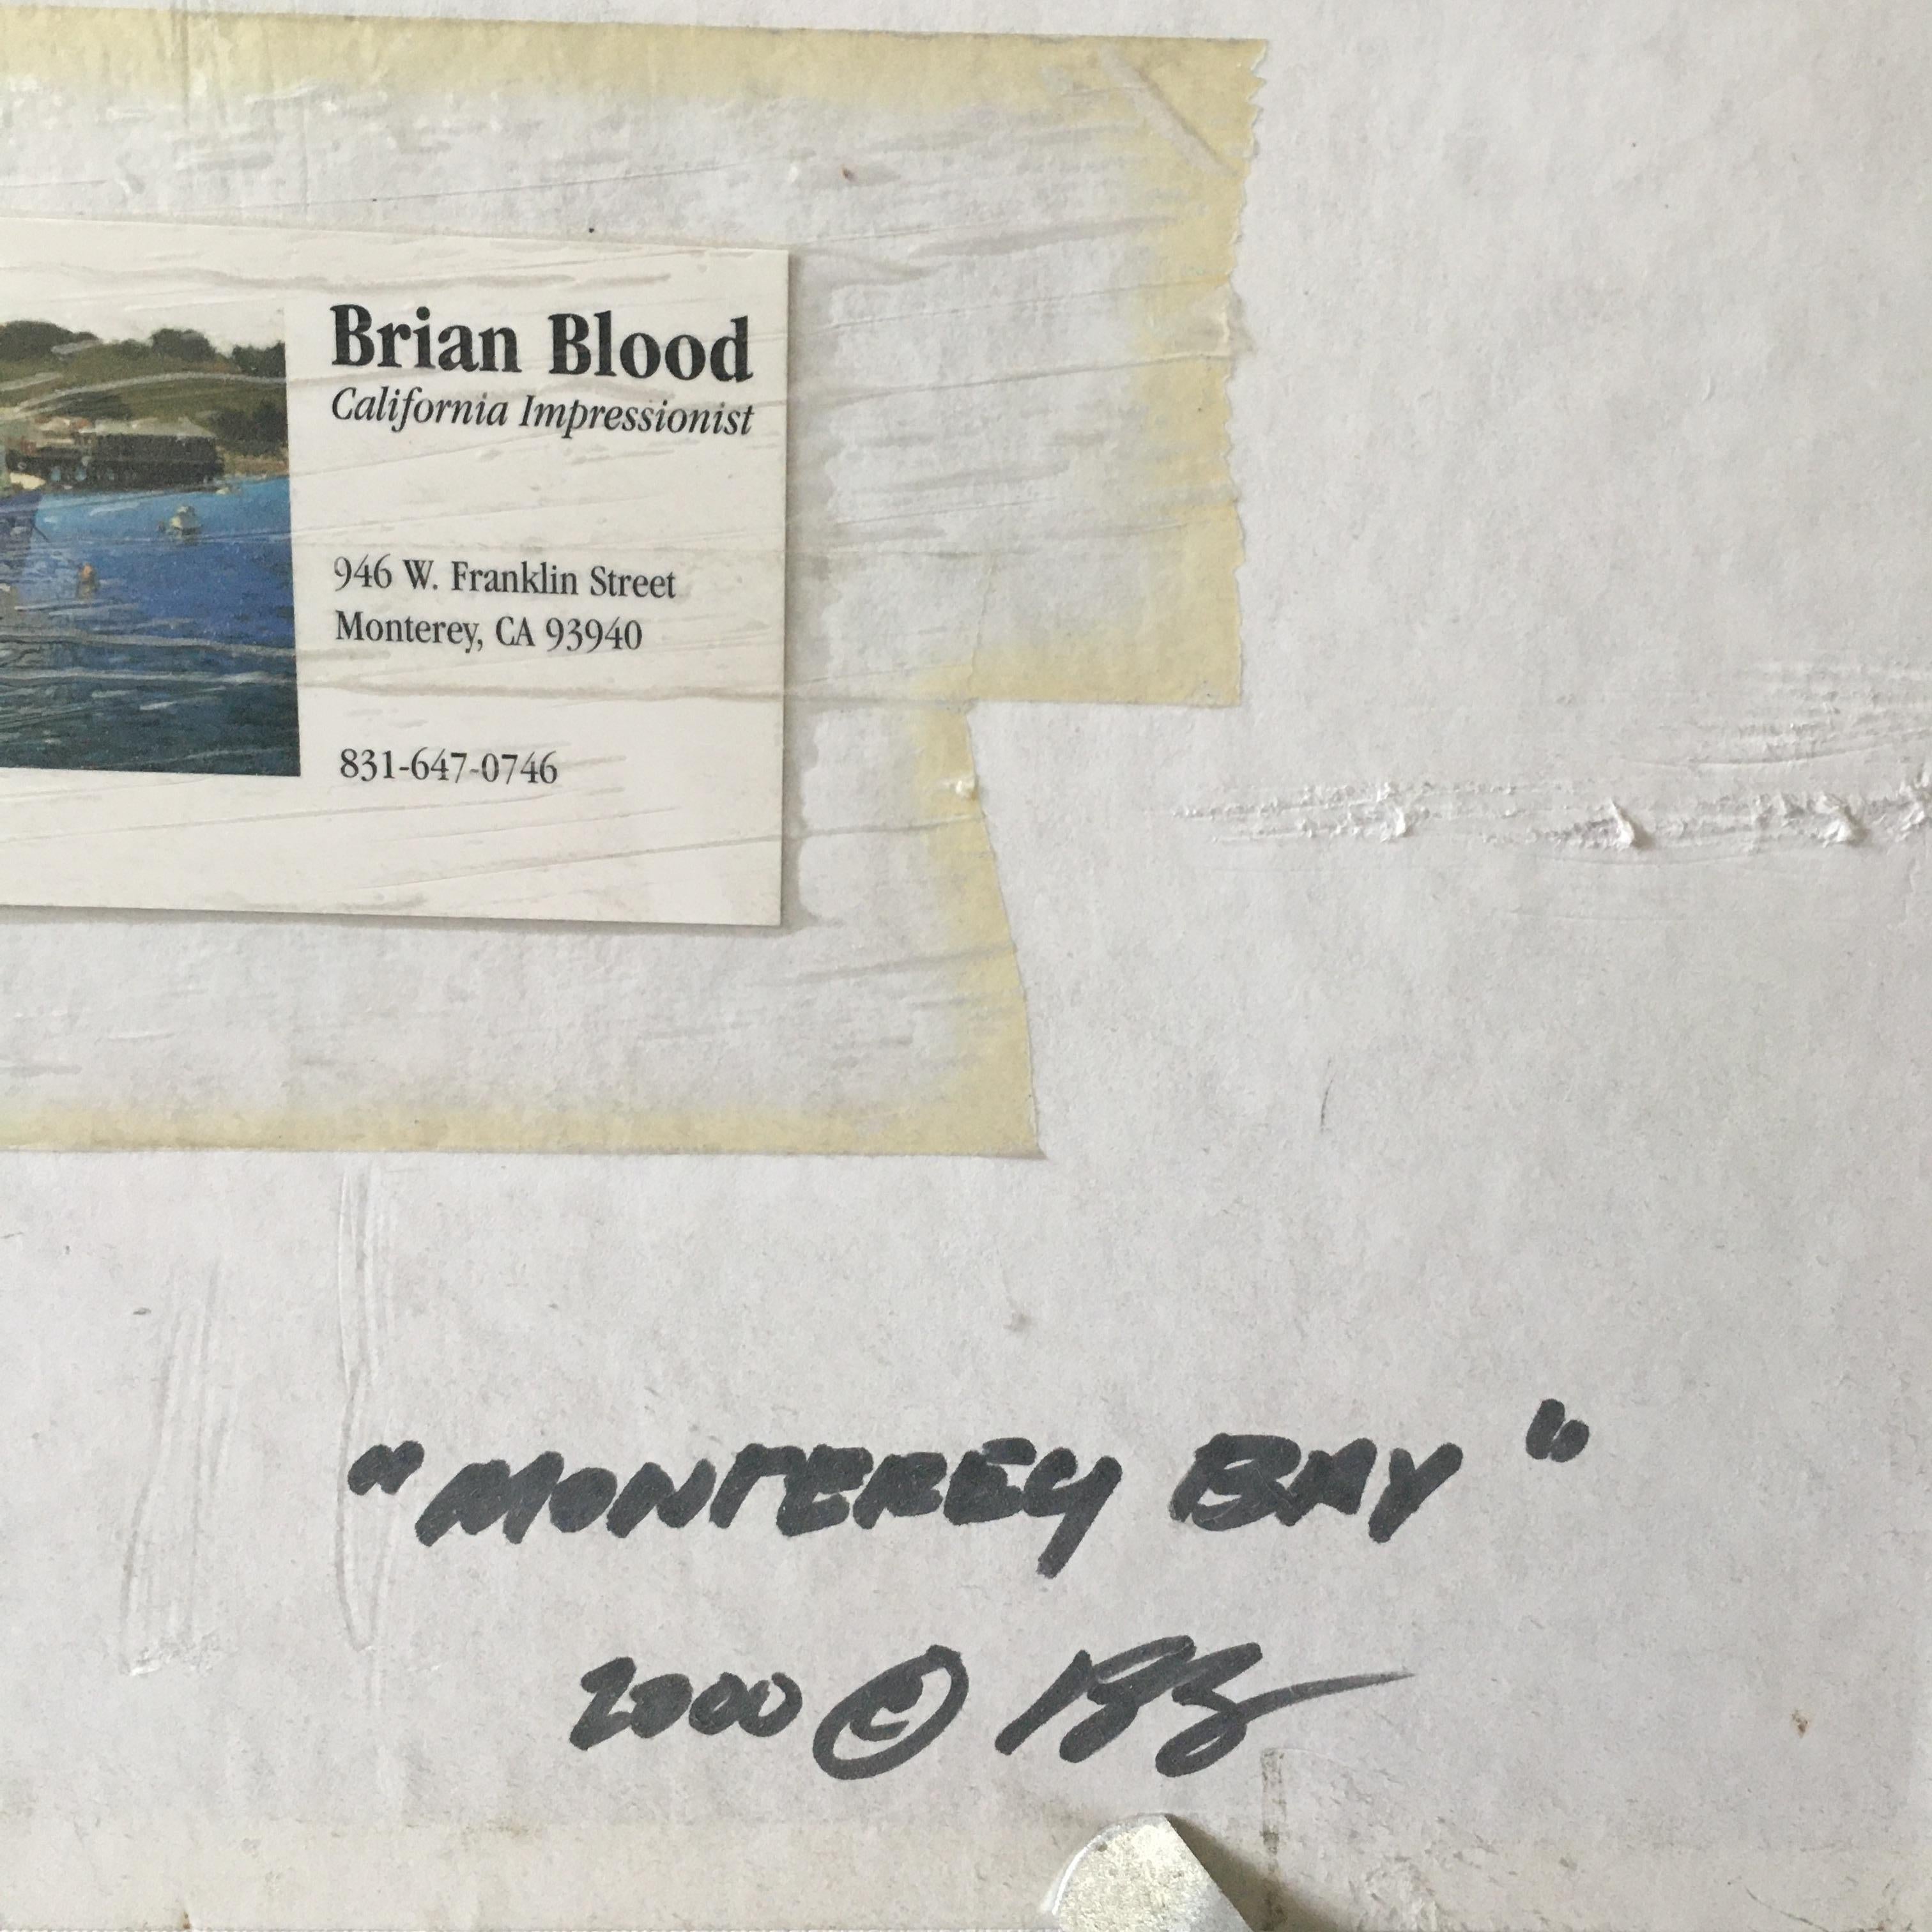 Brian Blood 'Monterey Bay' Plein Air California Impressionist Seascape Painting For Sale 2